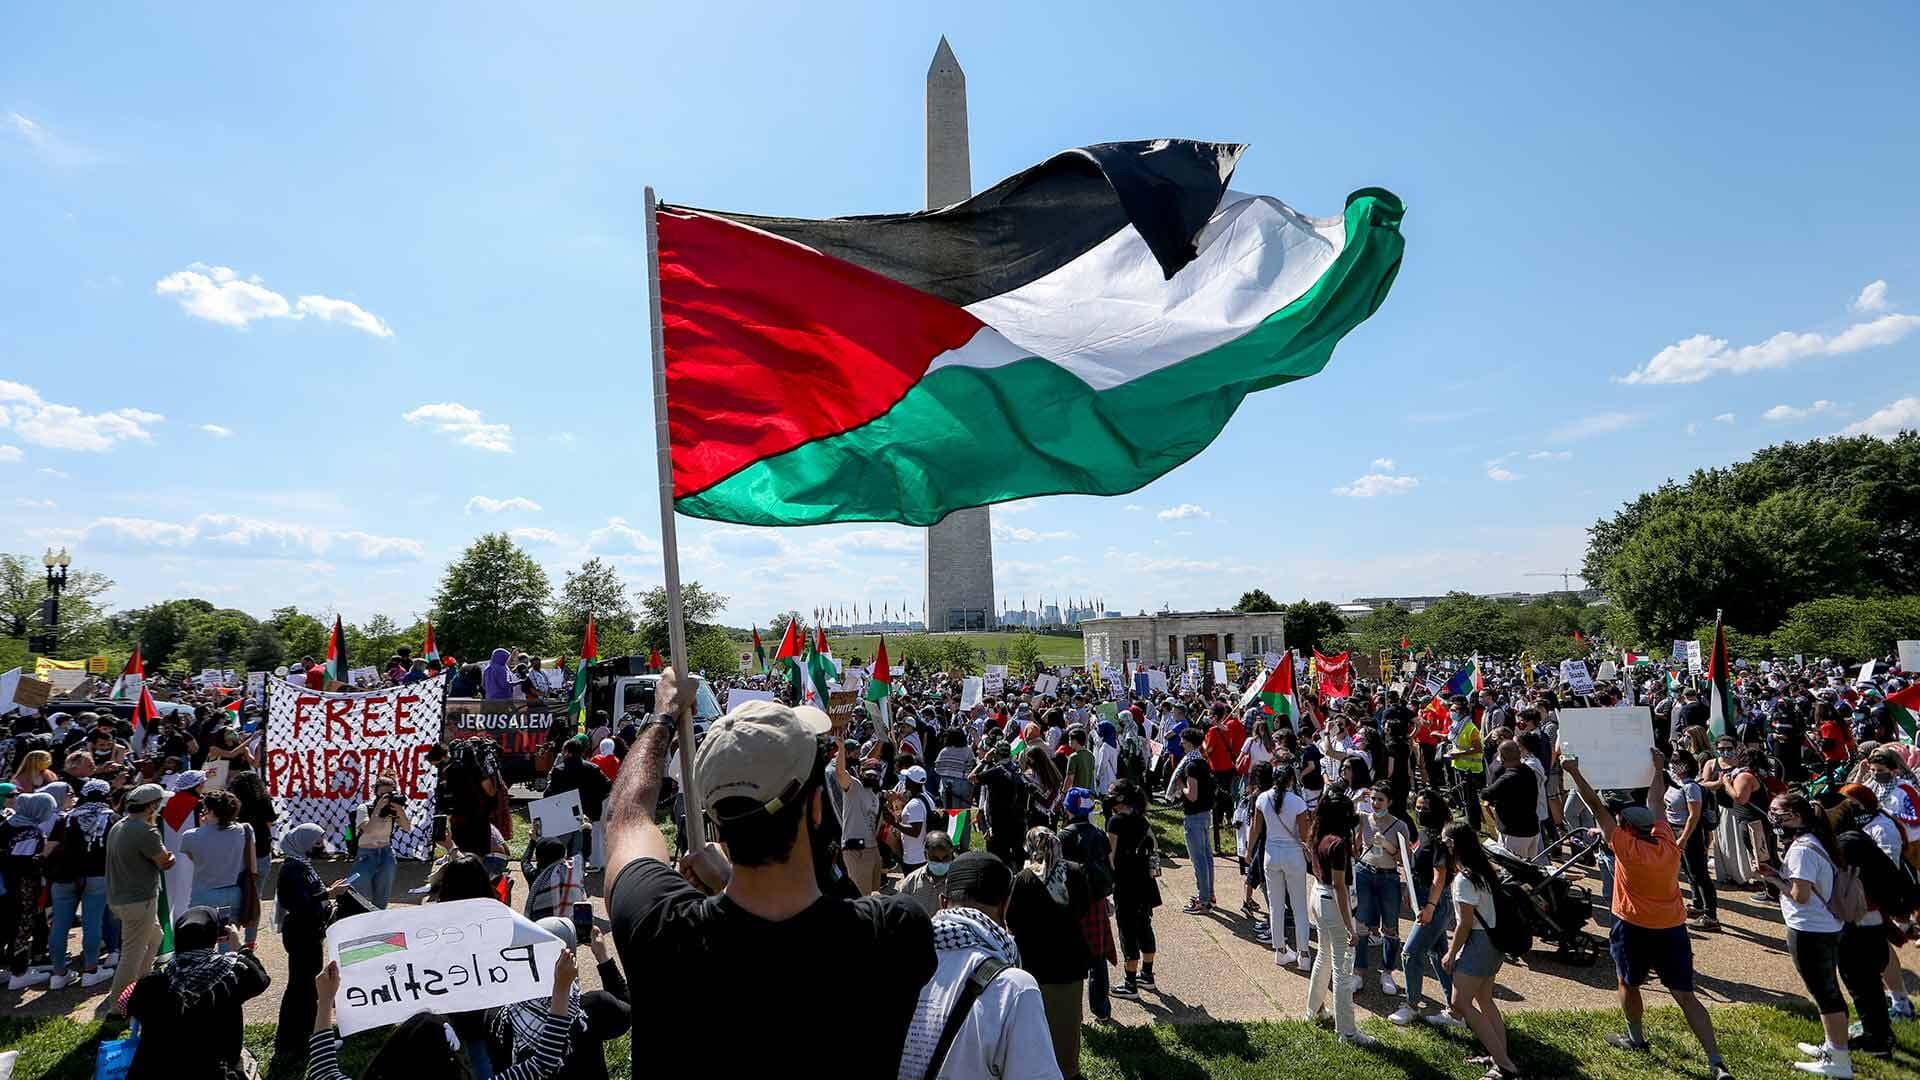 Supporters of Palestine gather in Washington, D.C.